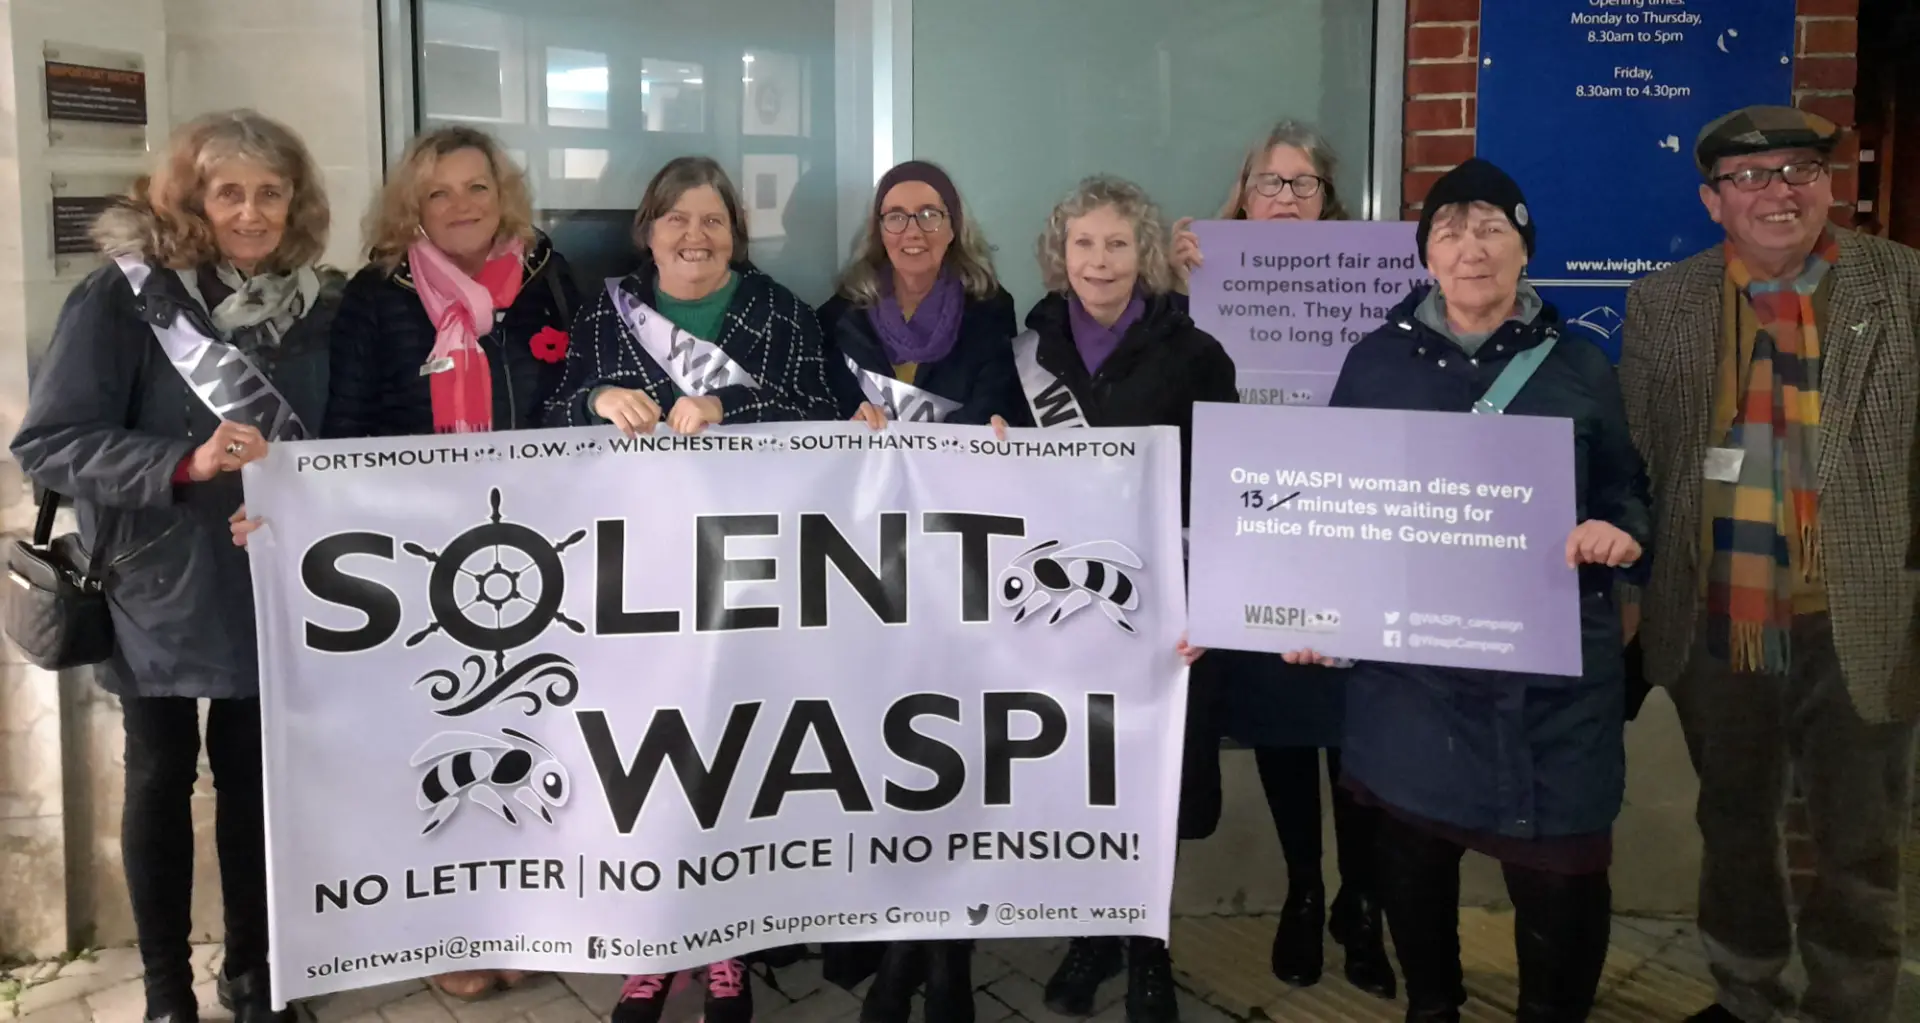 Solent WASPI with Michael Lilley